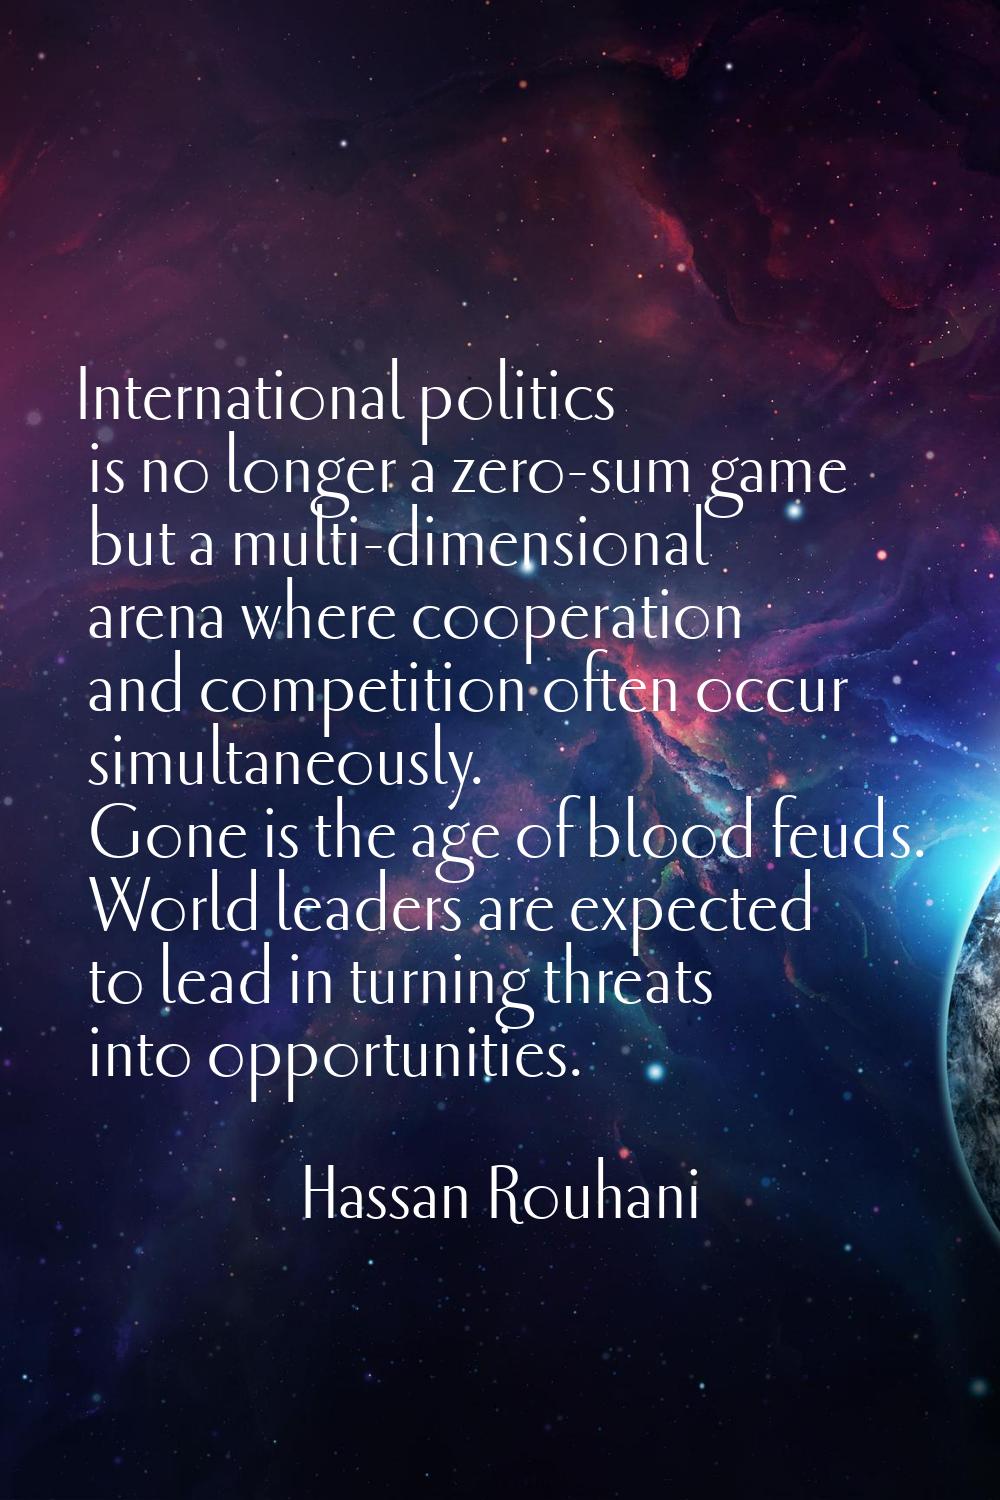 International politics is no longer a zero-sum game but a multi-dimensional arena where cooperation